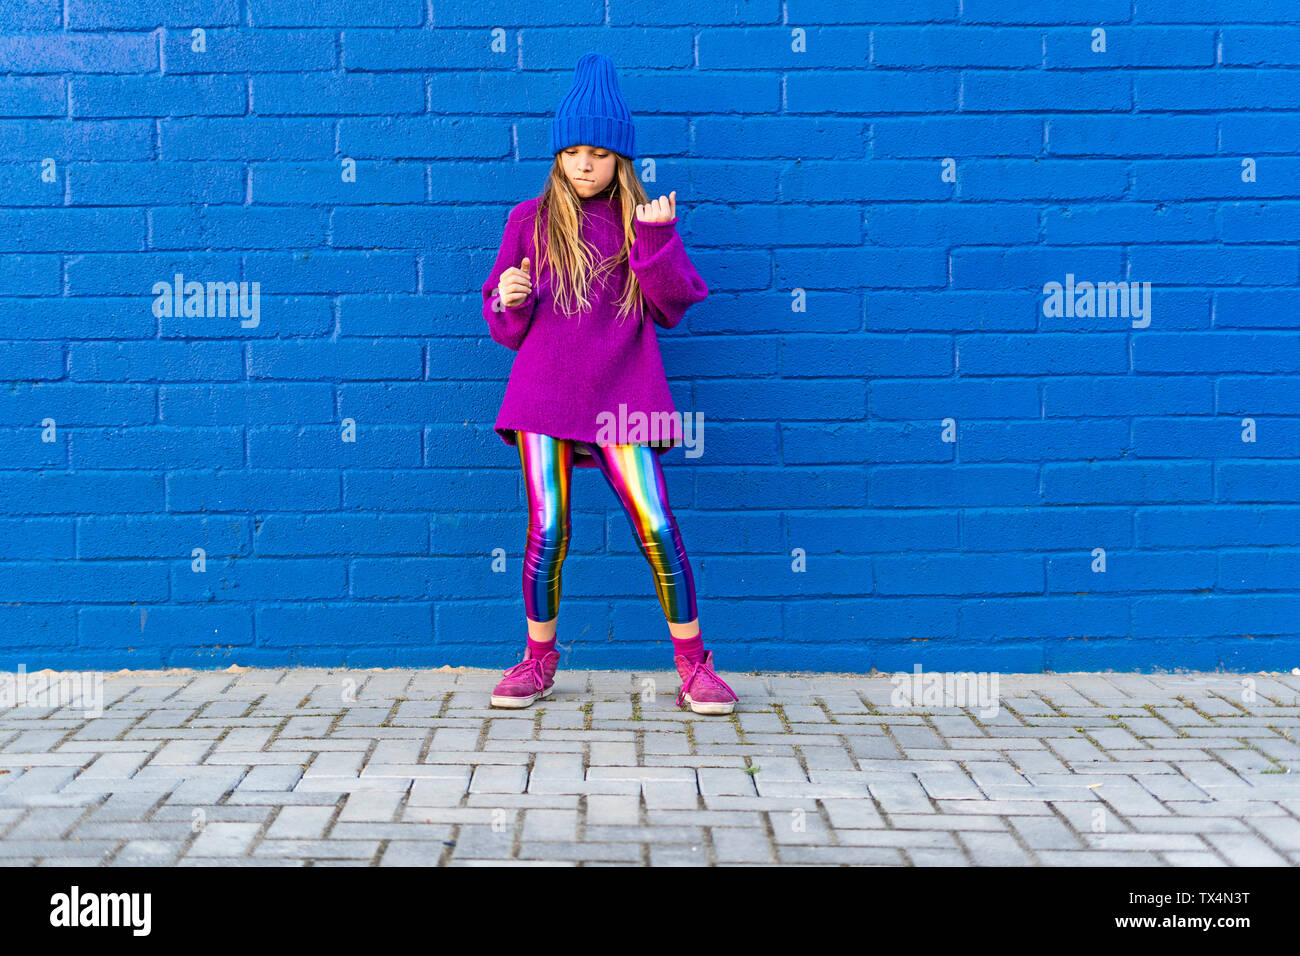 Girl wearing blue cap and oversized pink pullover standing in front of blue wall dancing Stock Photo